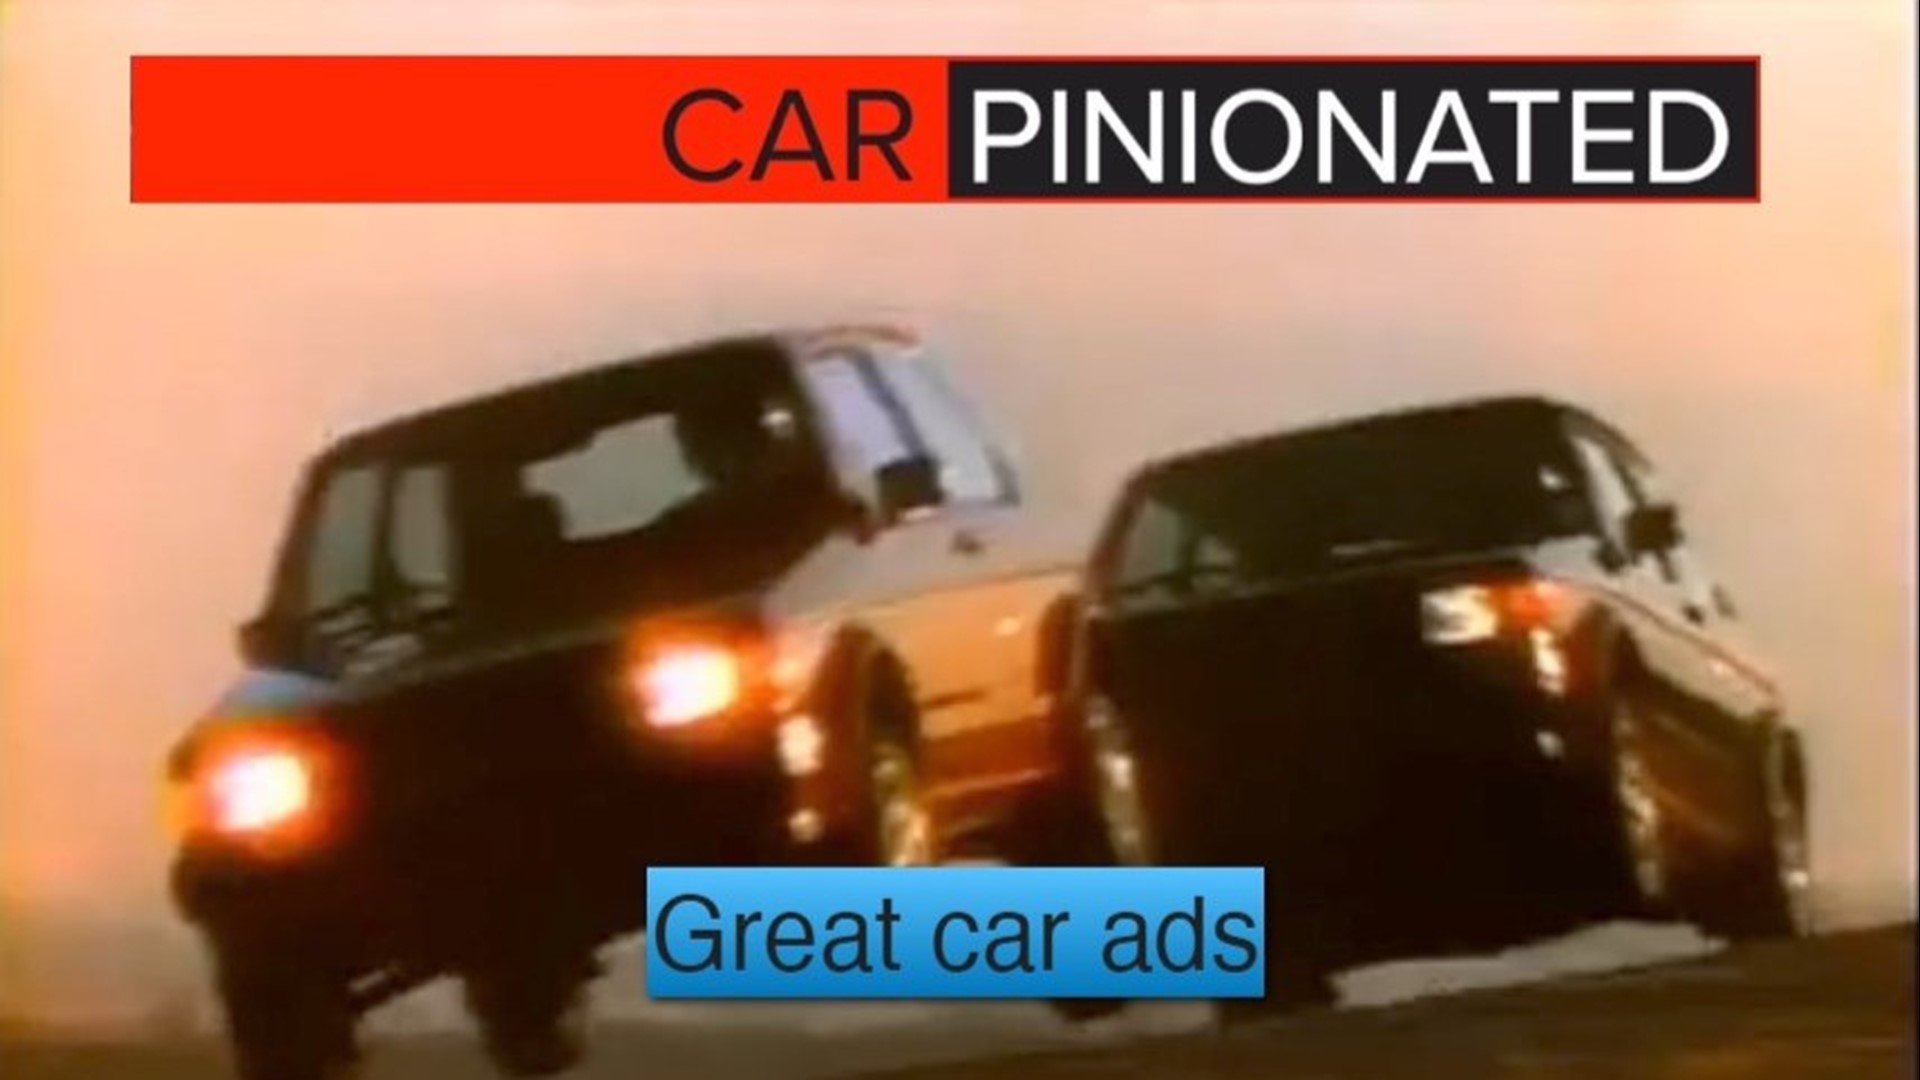 Tesla turns to video ads, so we look back at some of our favorite car advertising.